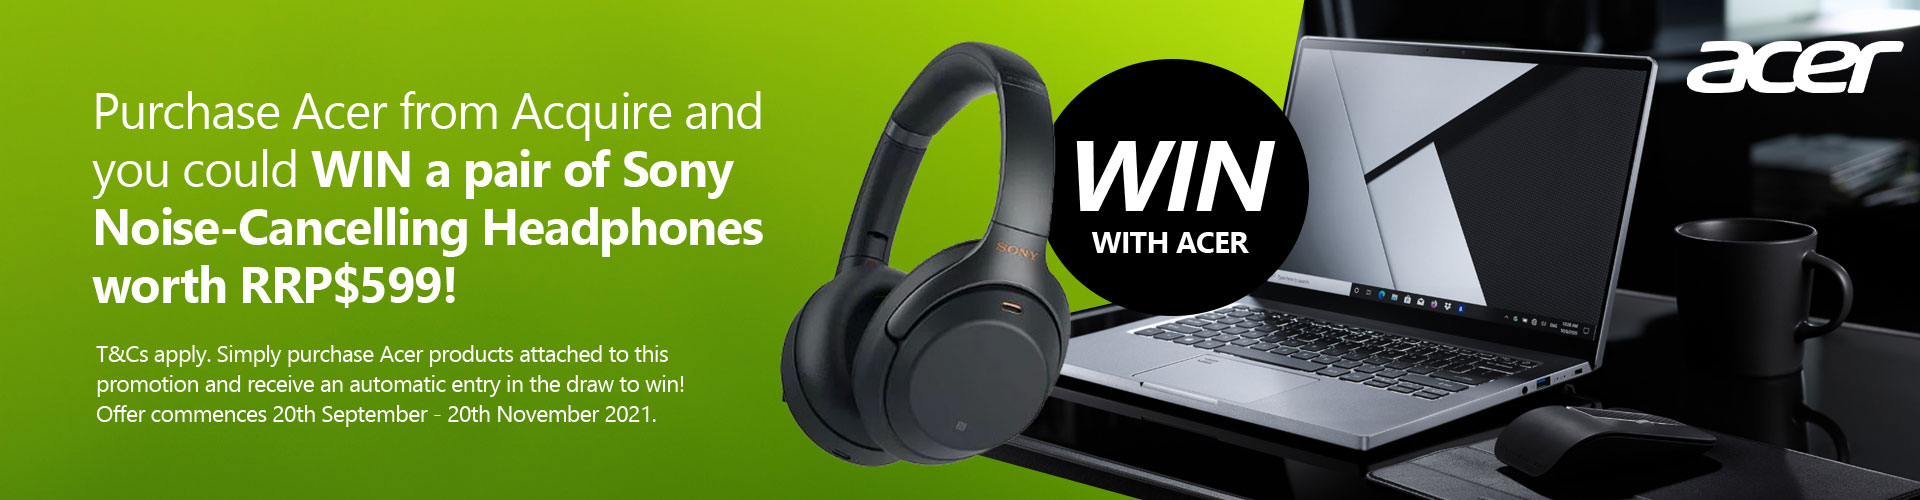 Purchase Acer from Acquire and you could win a pair of Sony noise-cancelling headphones worth $599!